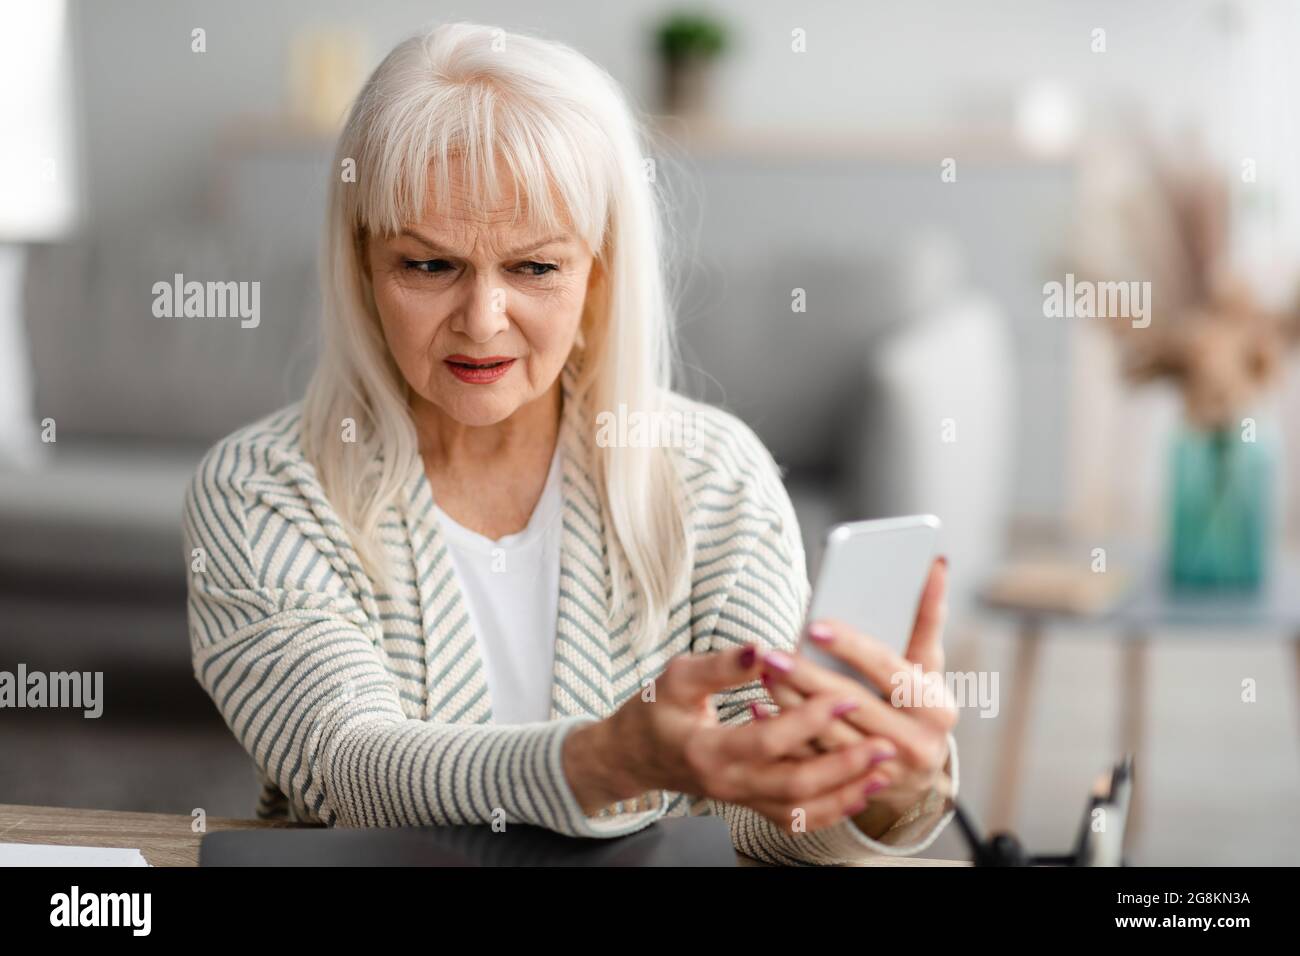 Confused senior woman using her mobile phone Stock Photo